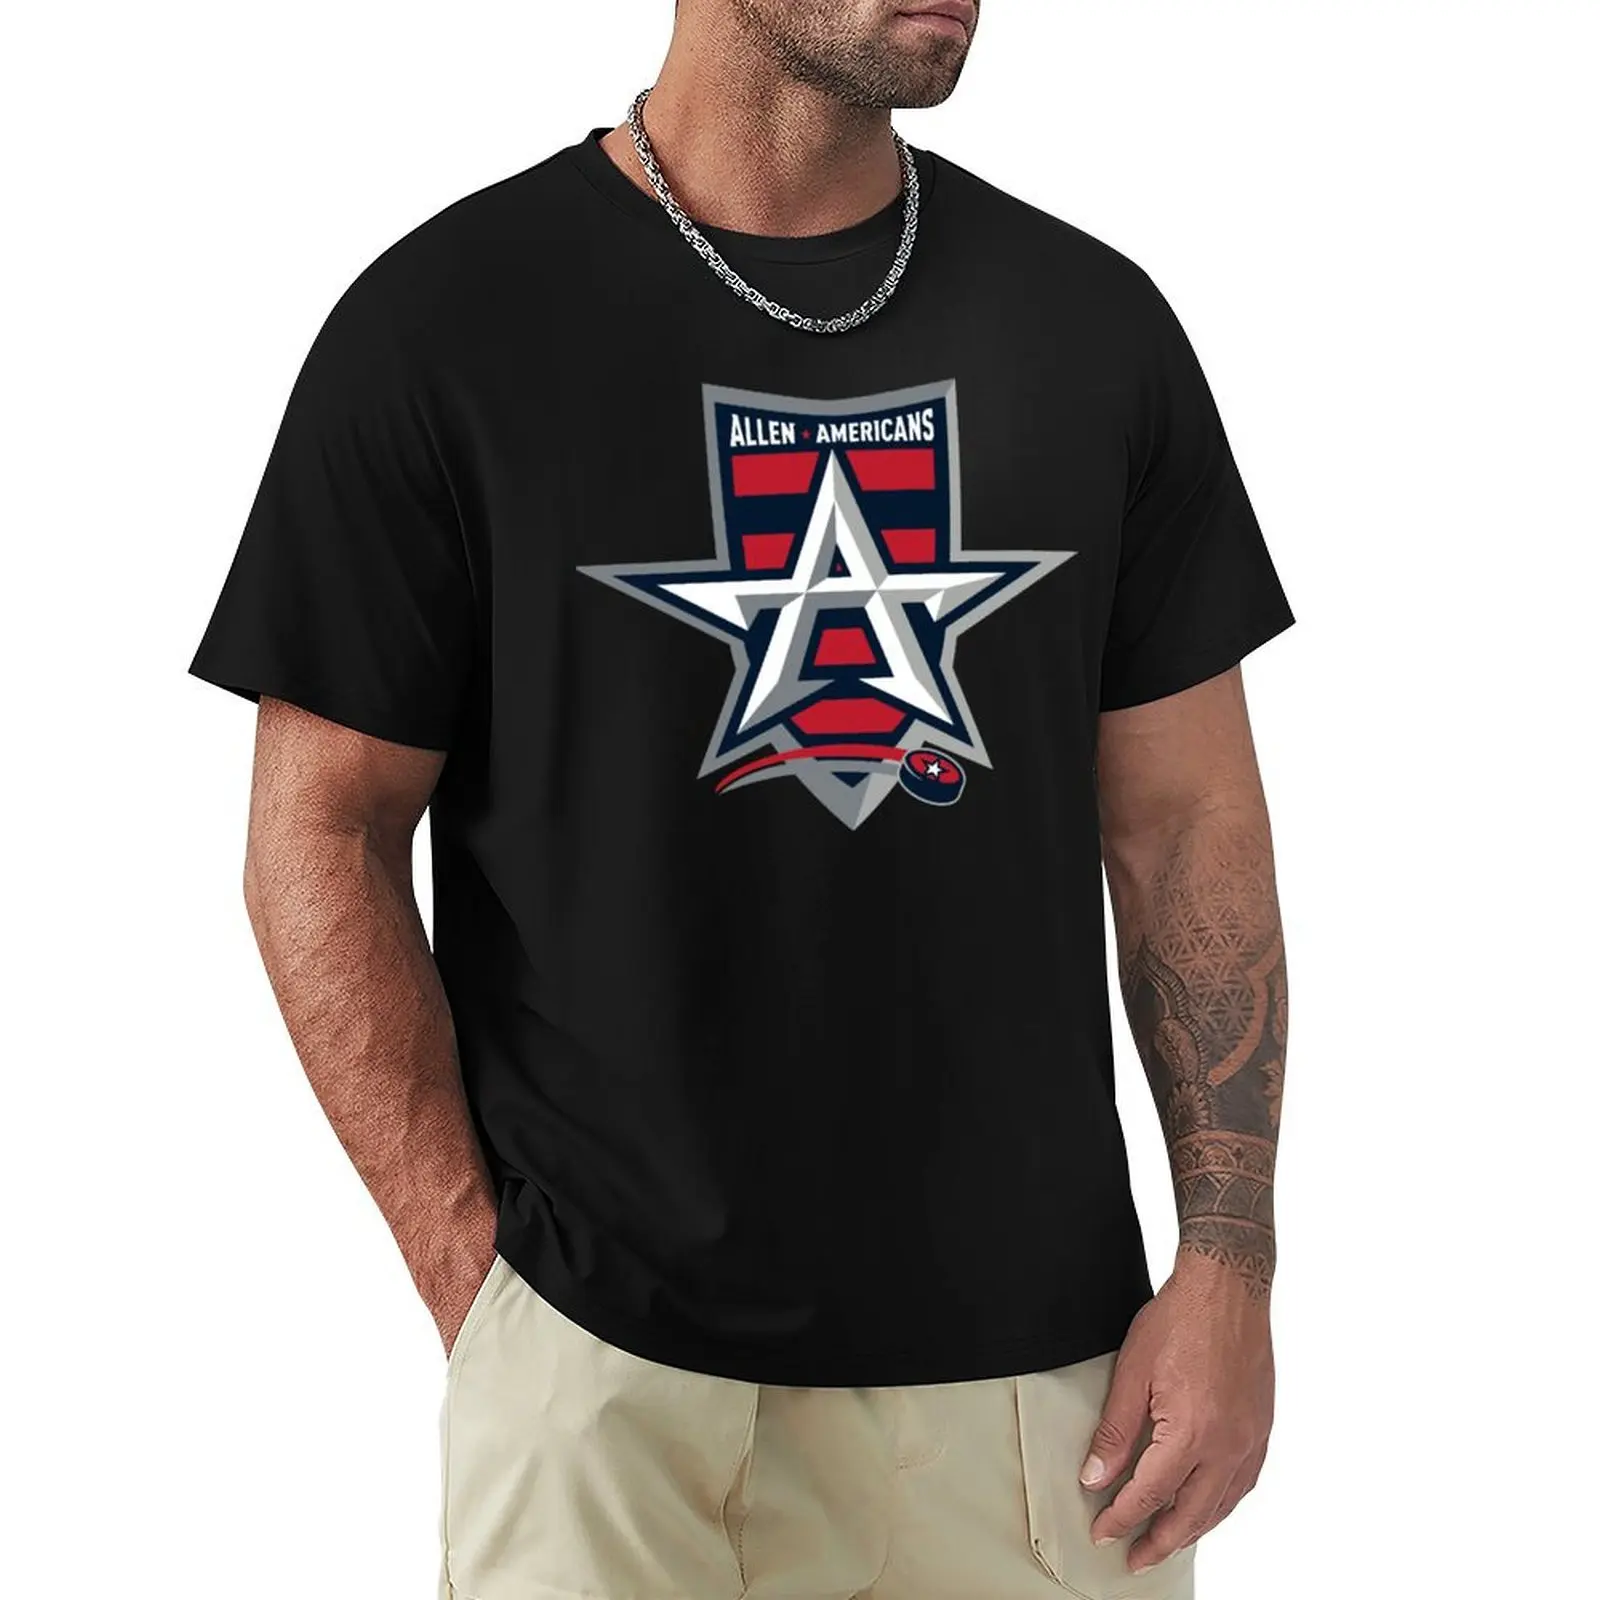 

ALLEN AMERICANS T-shirt customs design your own tees plus size tops aesthetic clothes Men's clothing